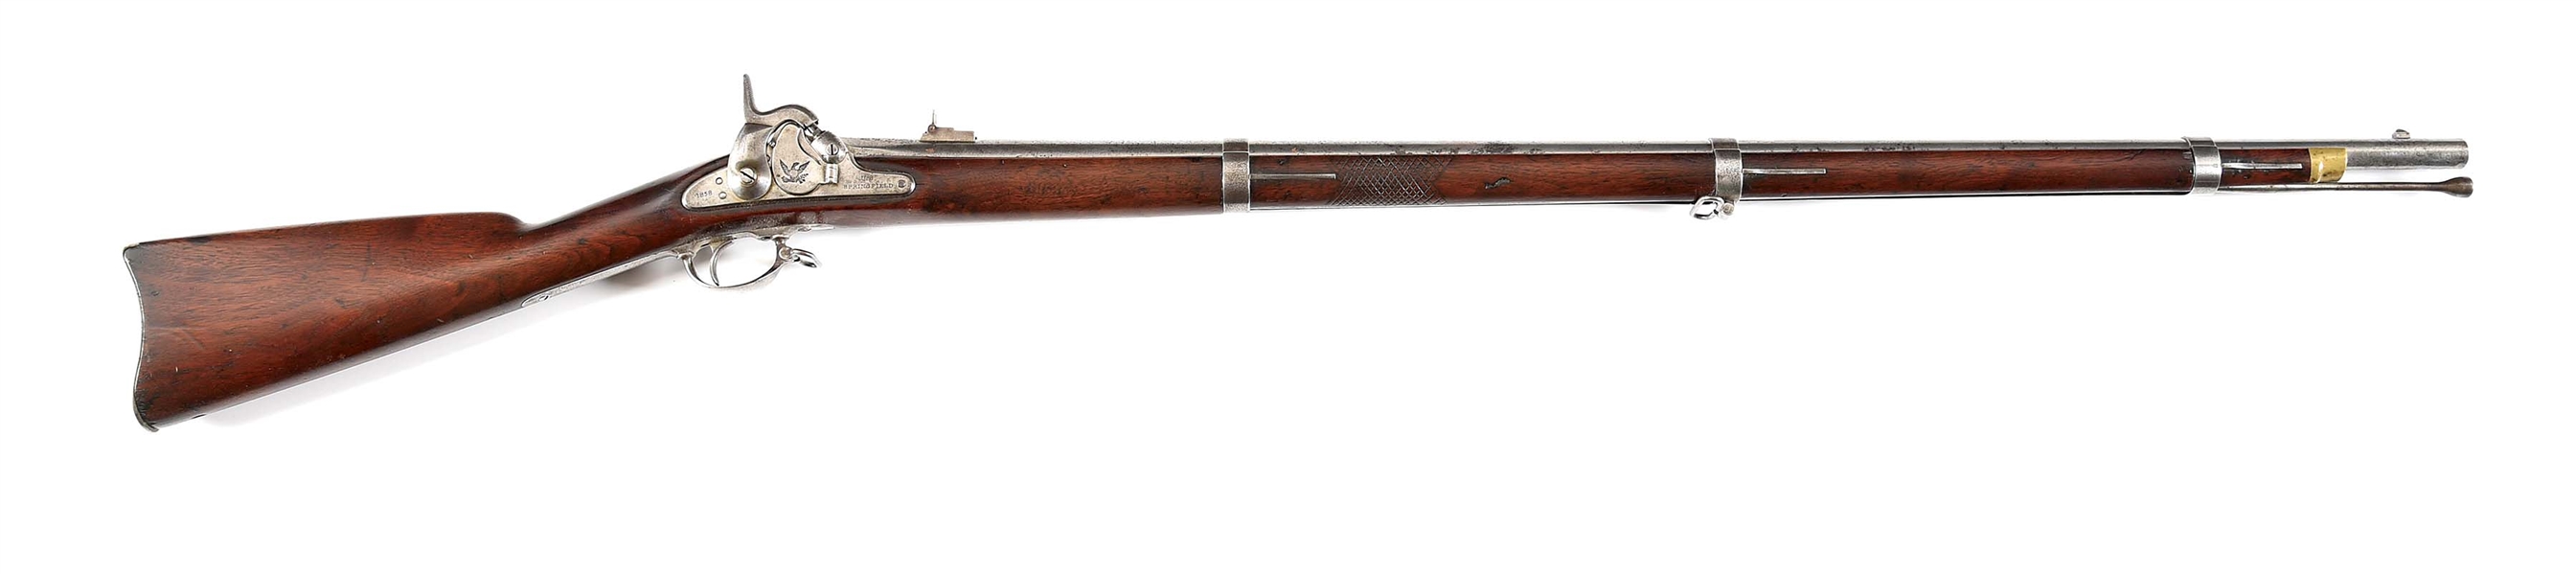 (A) US M1855 PERCUSSION RIFLE MUSKET BY SPRINGFIELD DATED 1858.